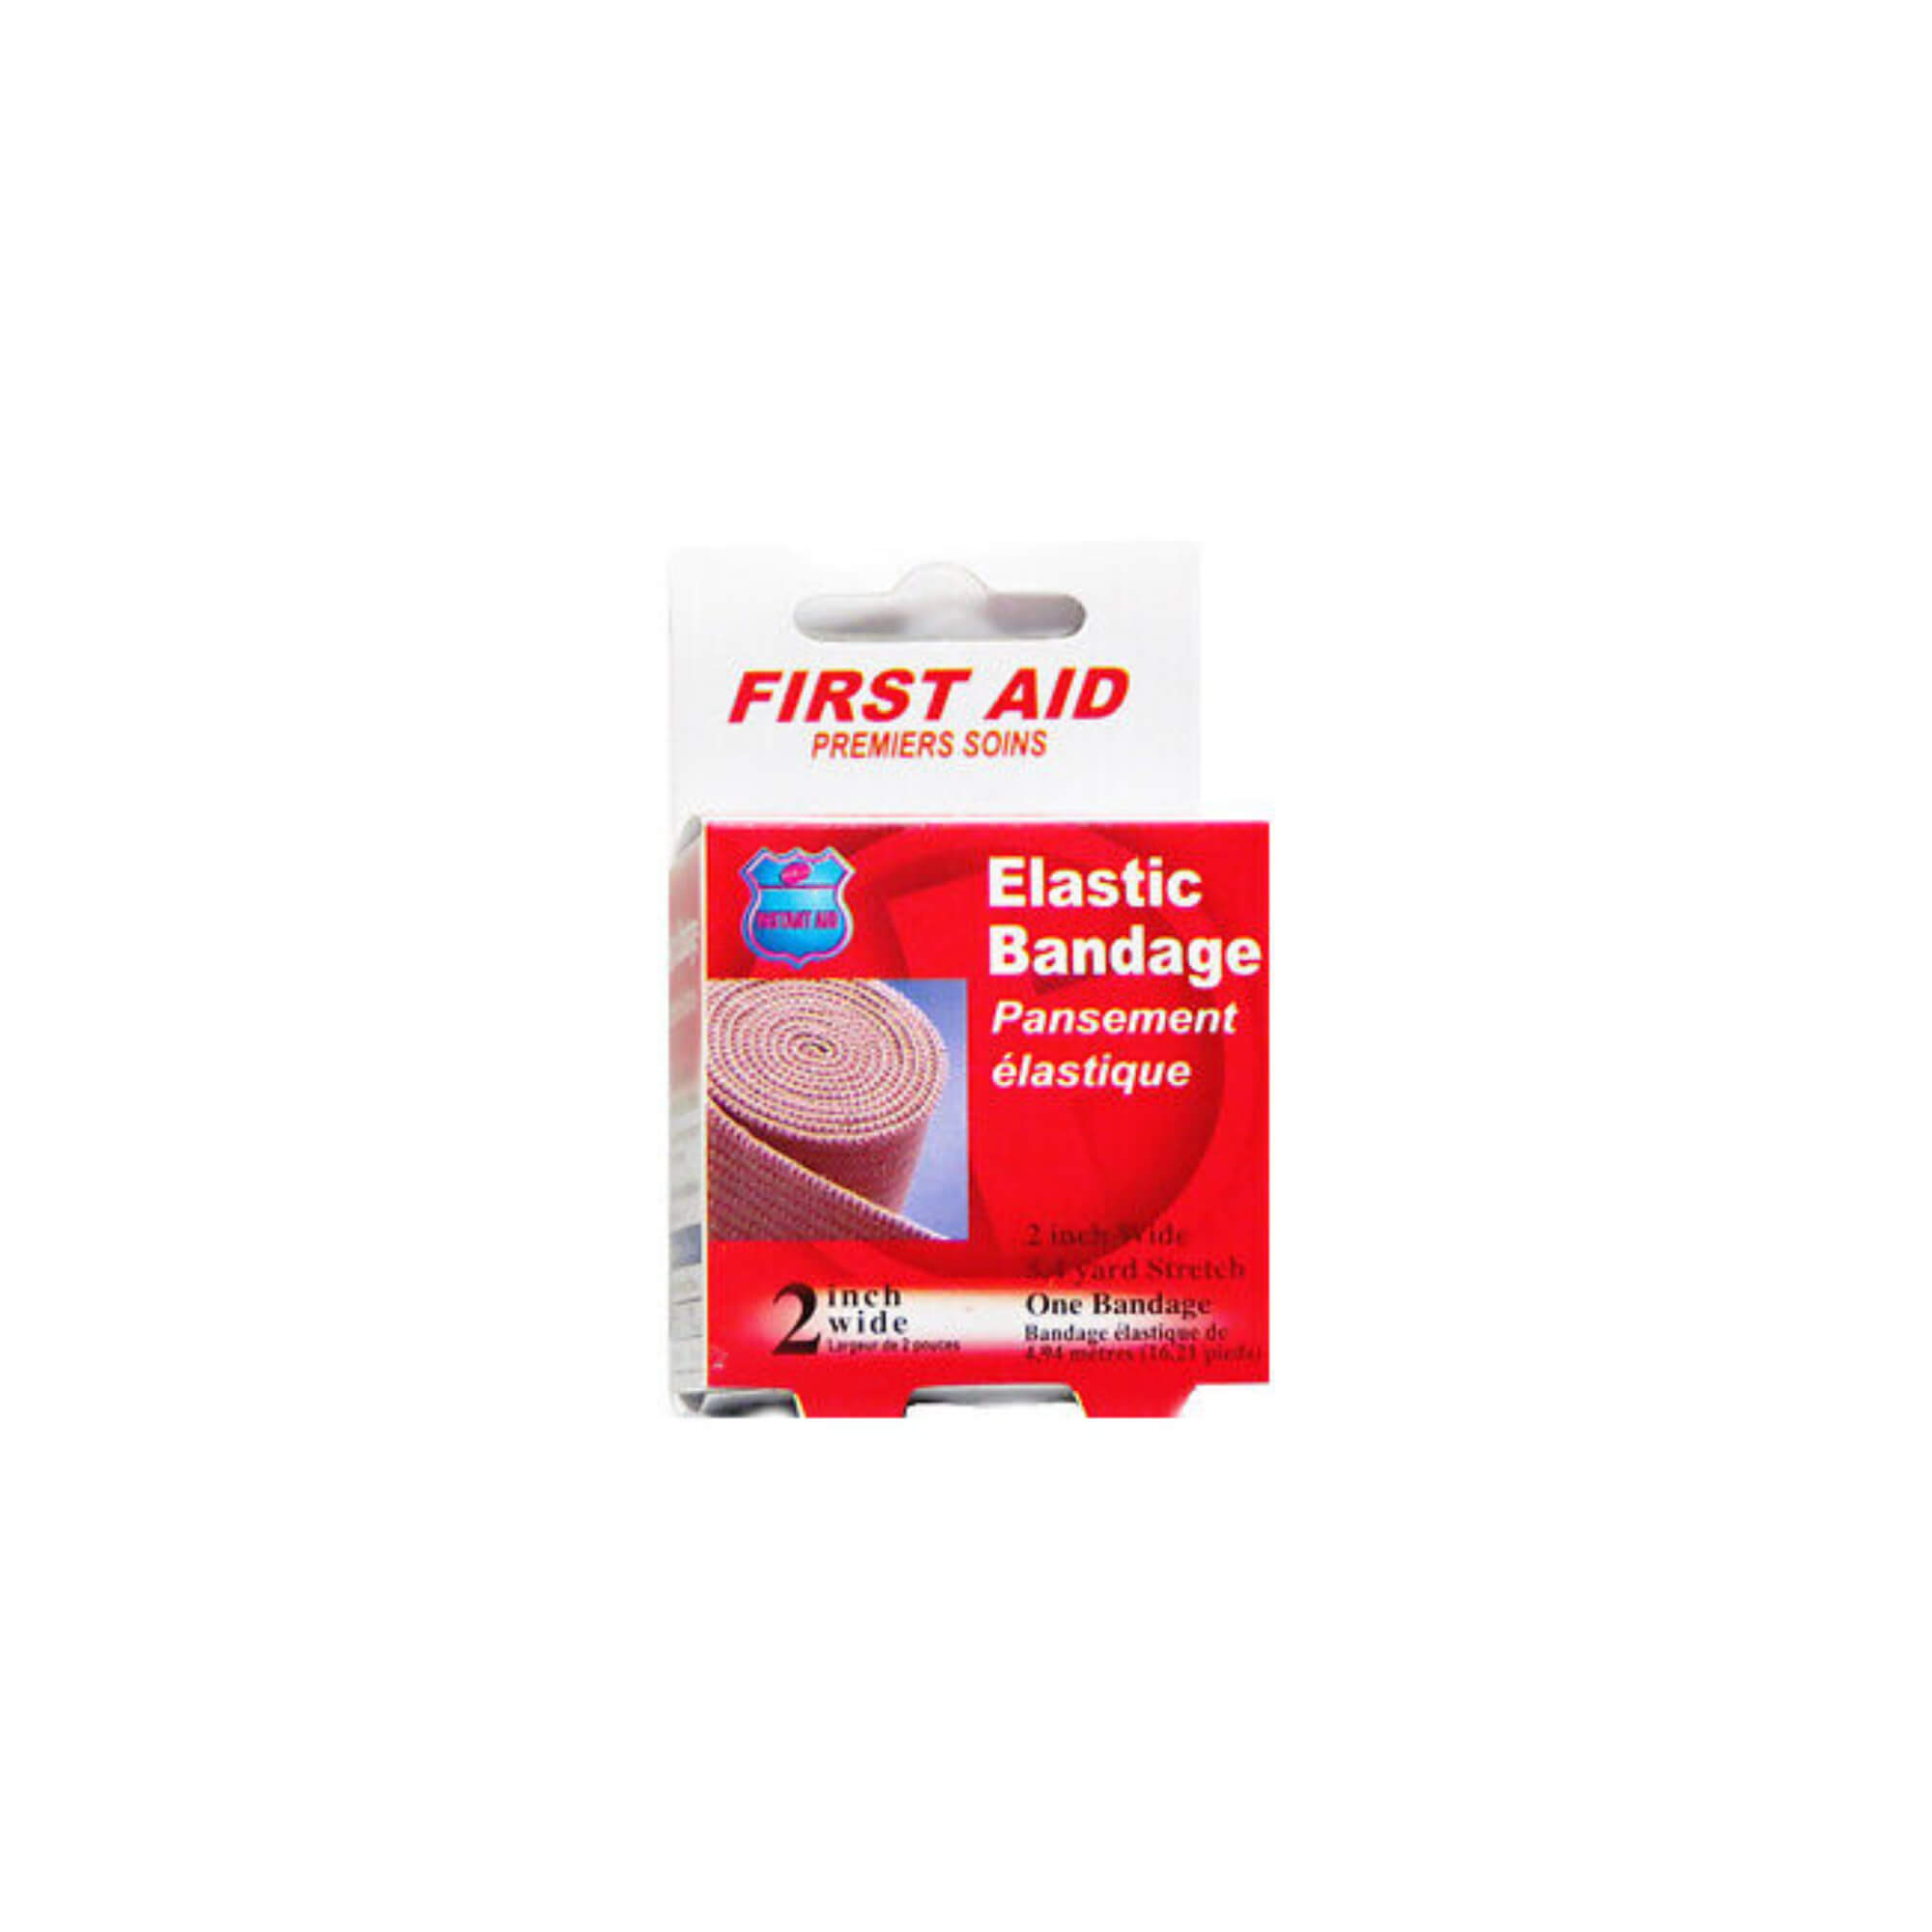 Instant Aid- 2 Inch Wide Elastic Bandage By Purest